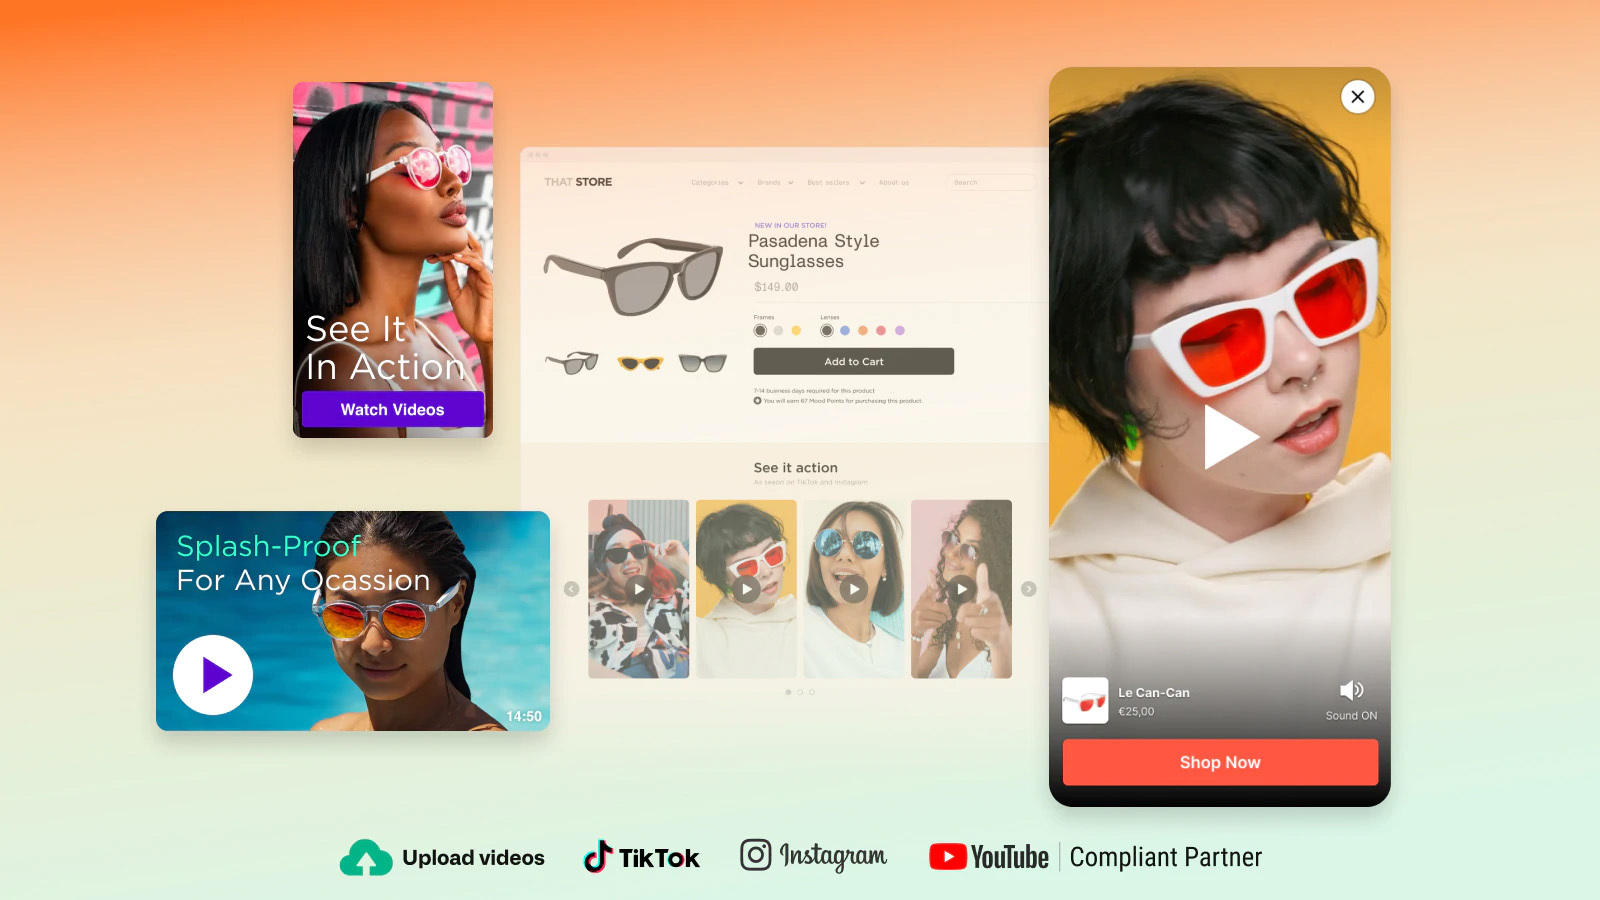 examples of video marketing centered around a single product - sunglasses